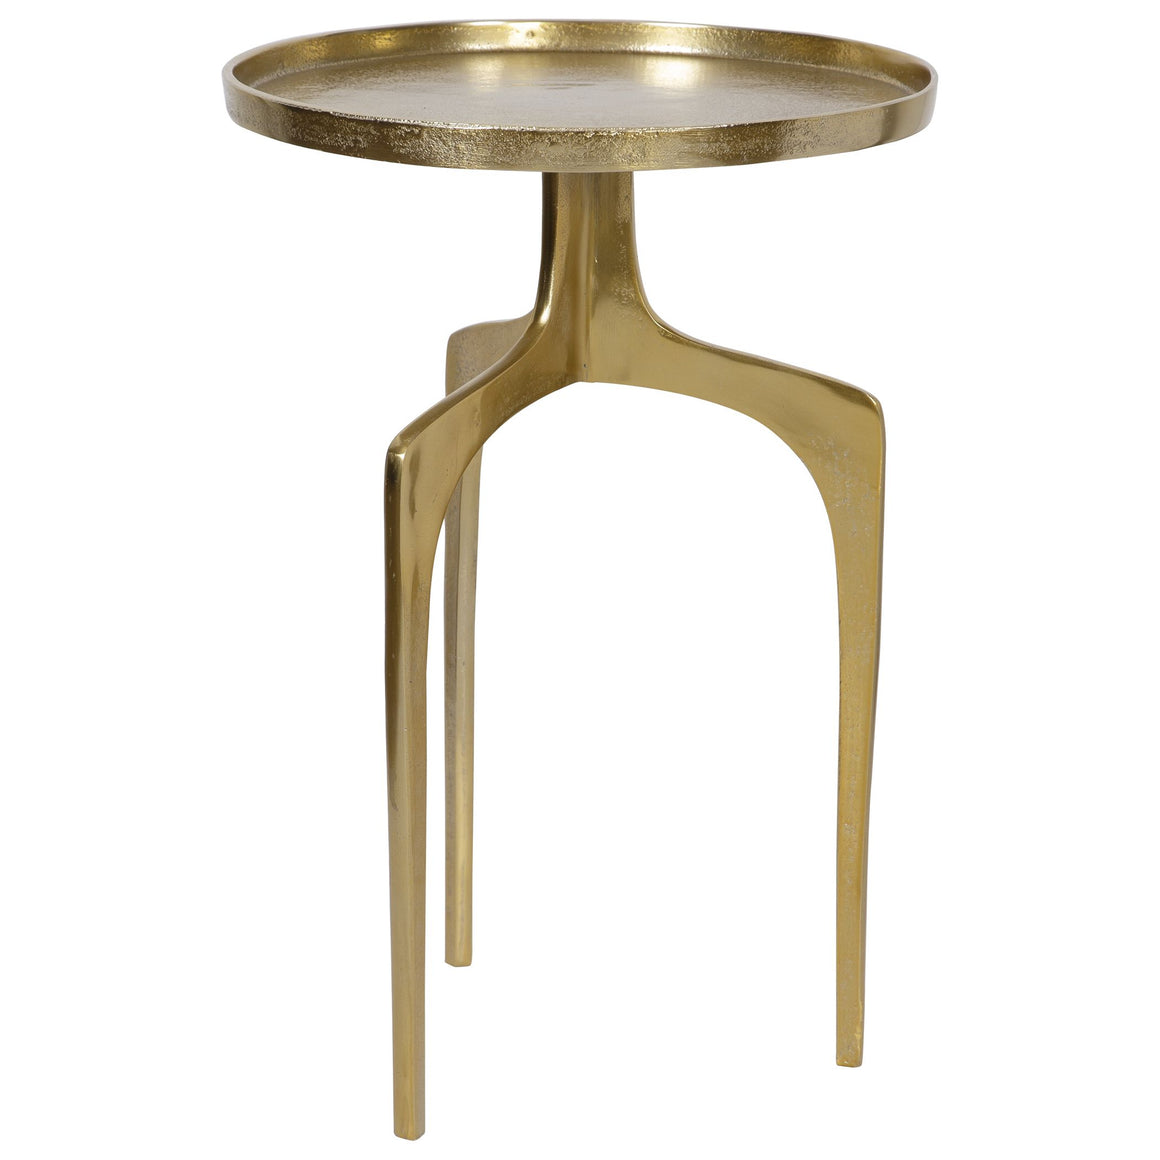 Curved Leg Accent Table -Soft Gold